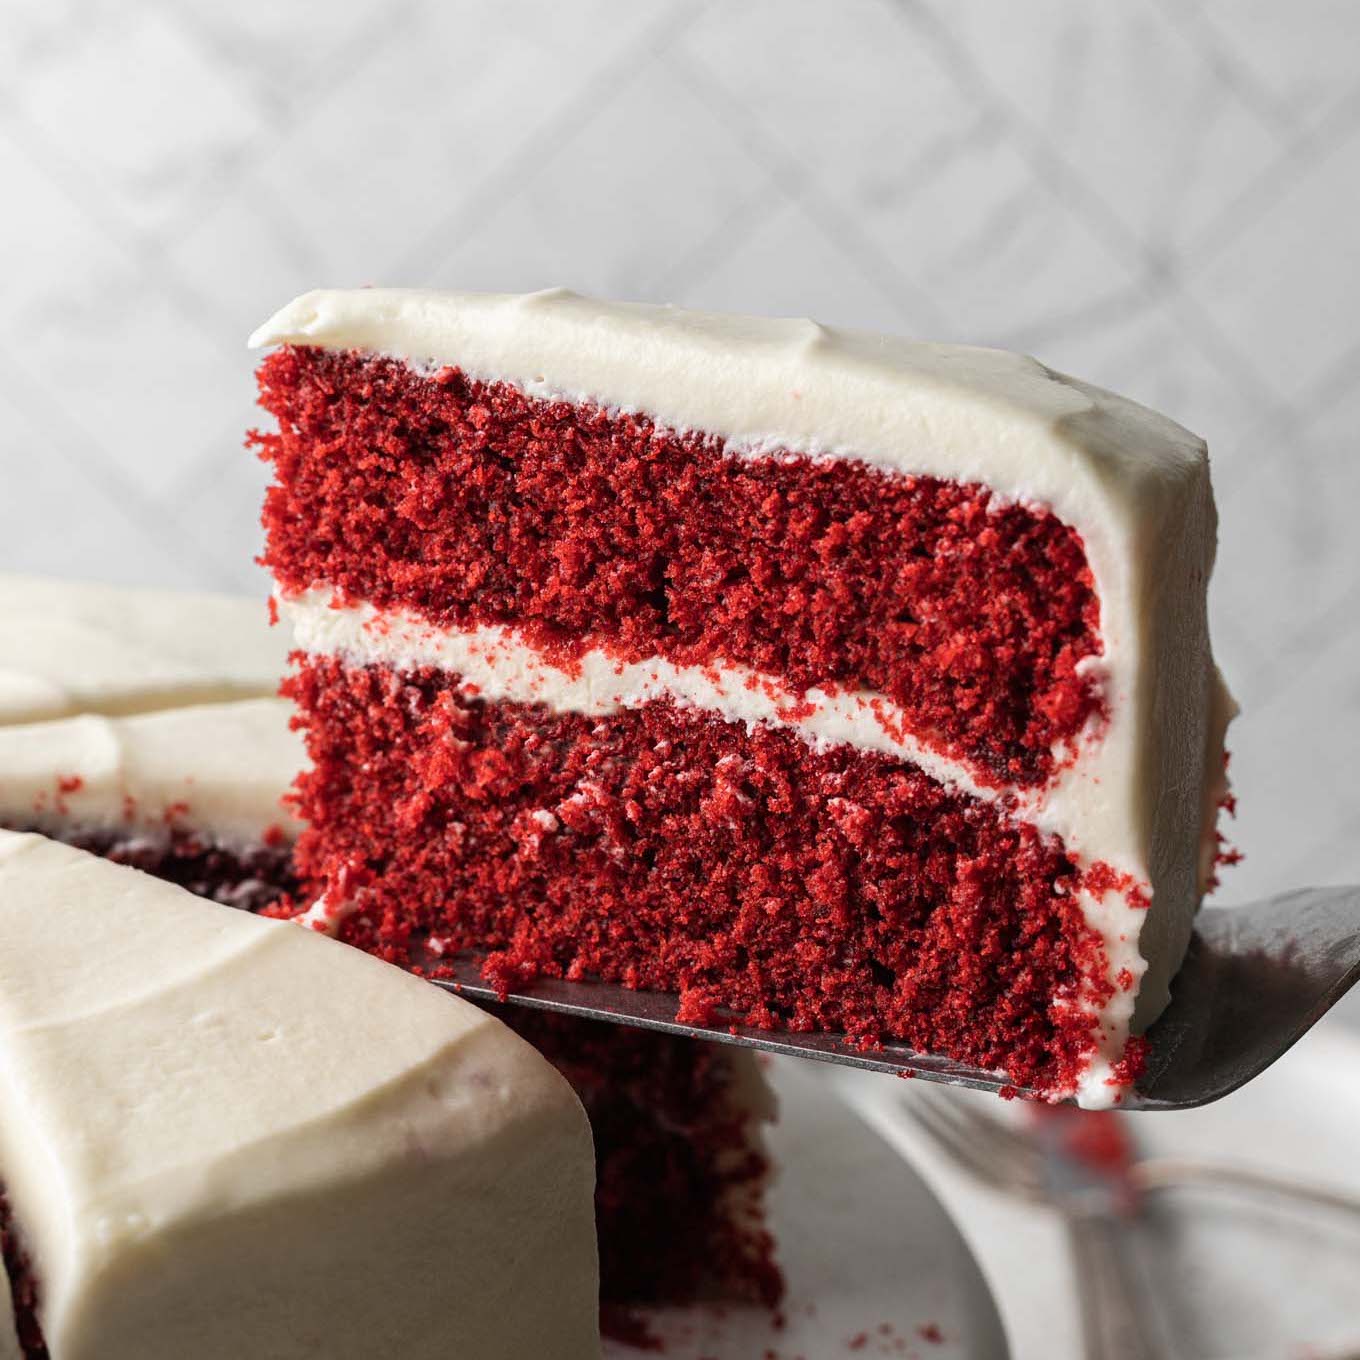 Classic Red Velvet Cake with Cream Cheese Frosting Recipe